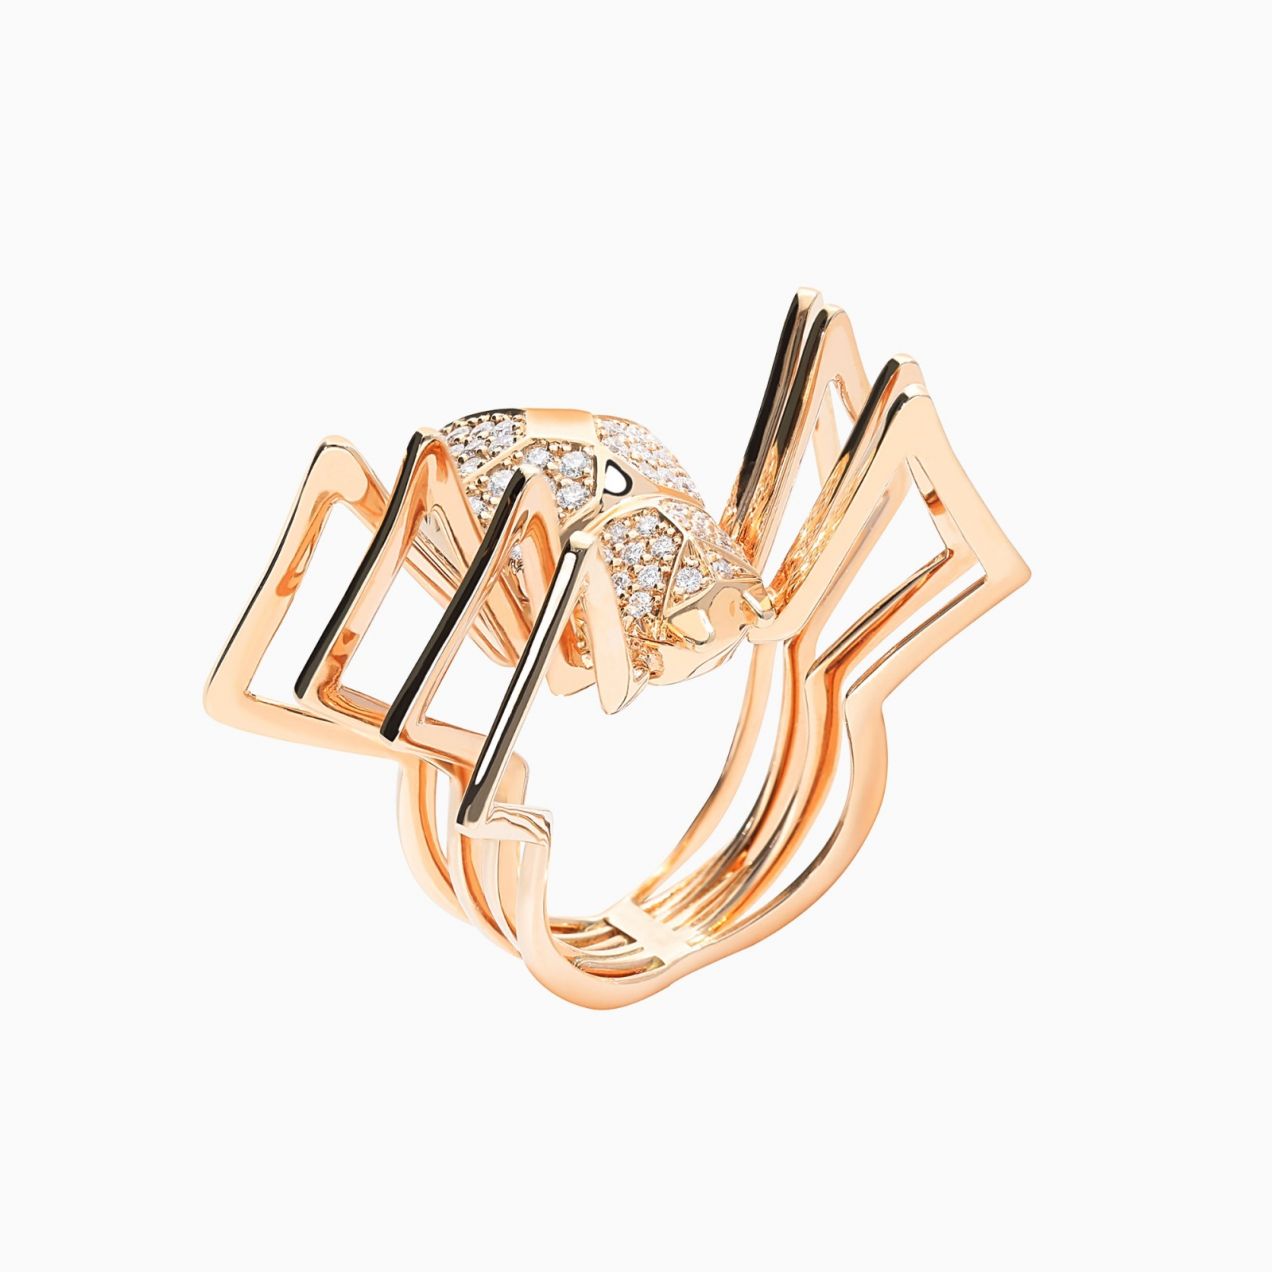 Pink gold spider ring with diamonds